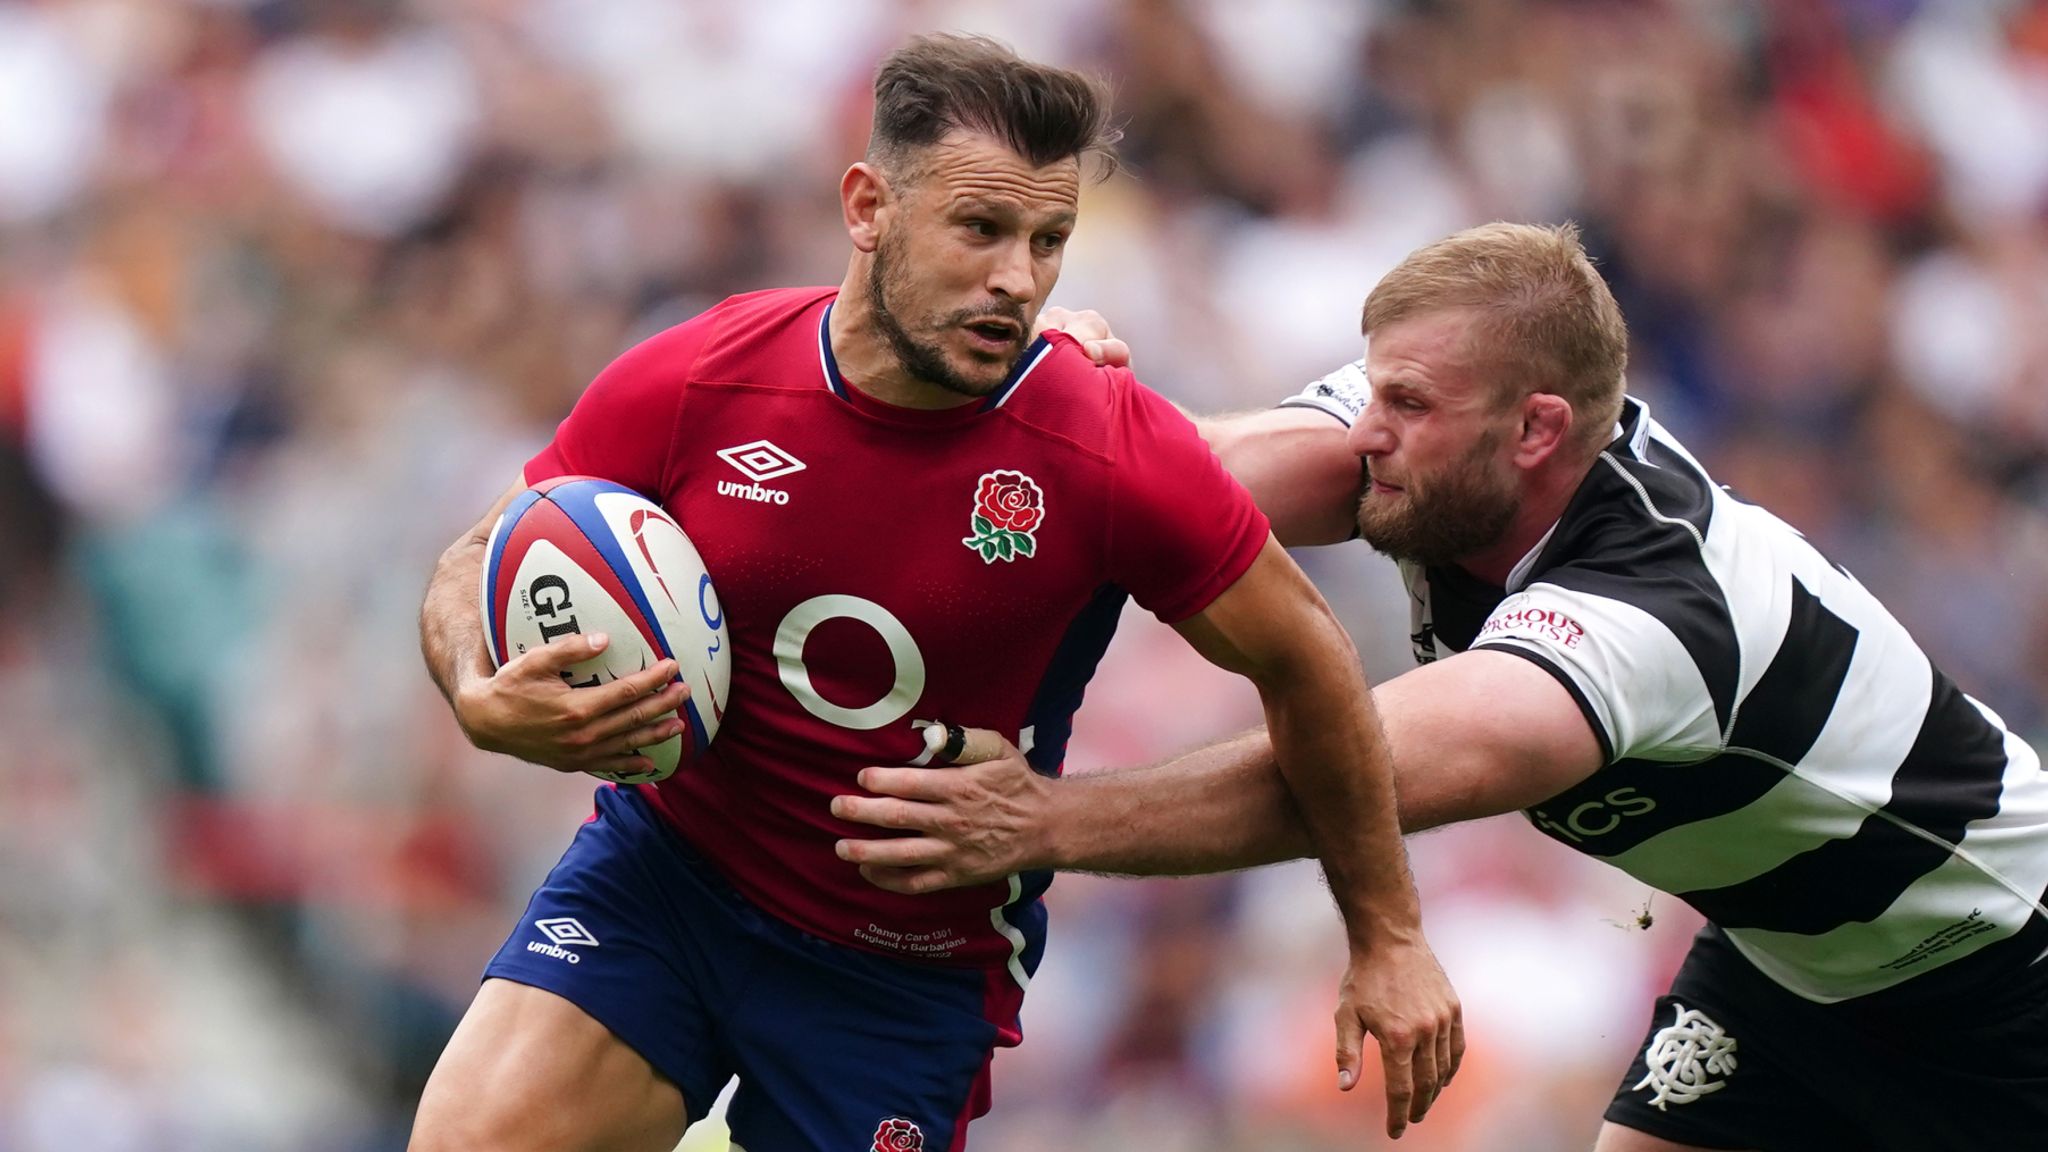 Billy Vunipola, Danny Care return to start for England vs Australia in first Test, live on Sky Sports Rugby Union News Sky Sports